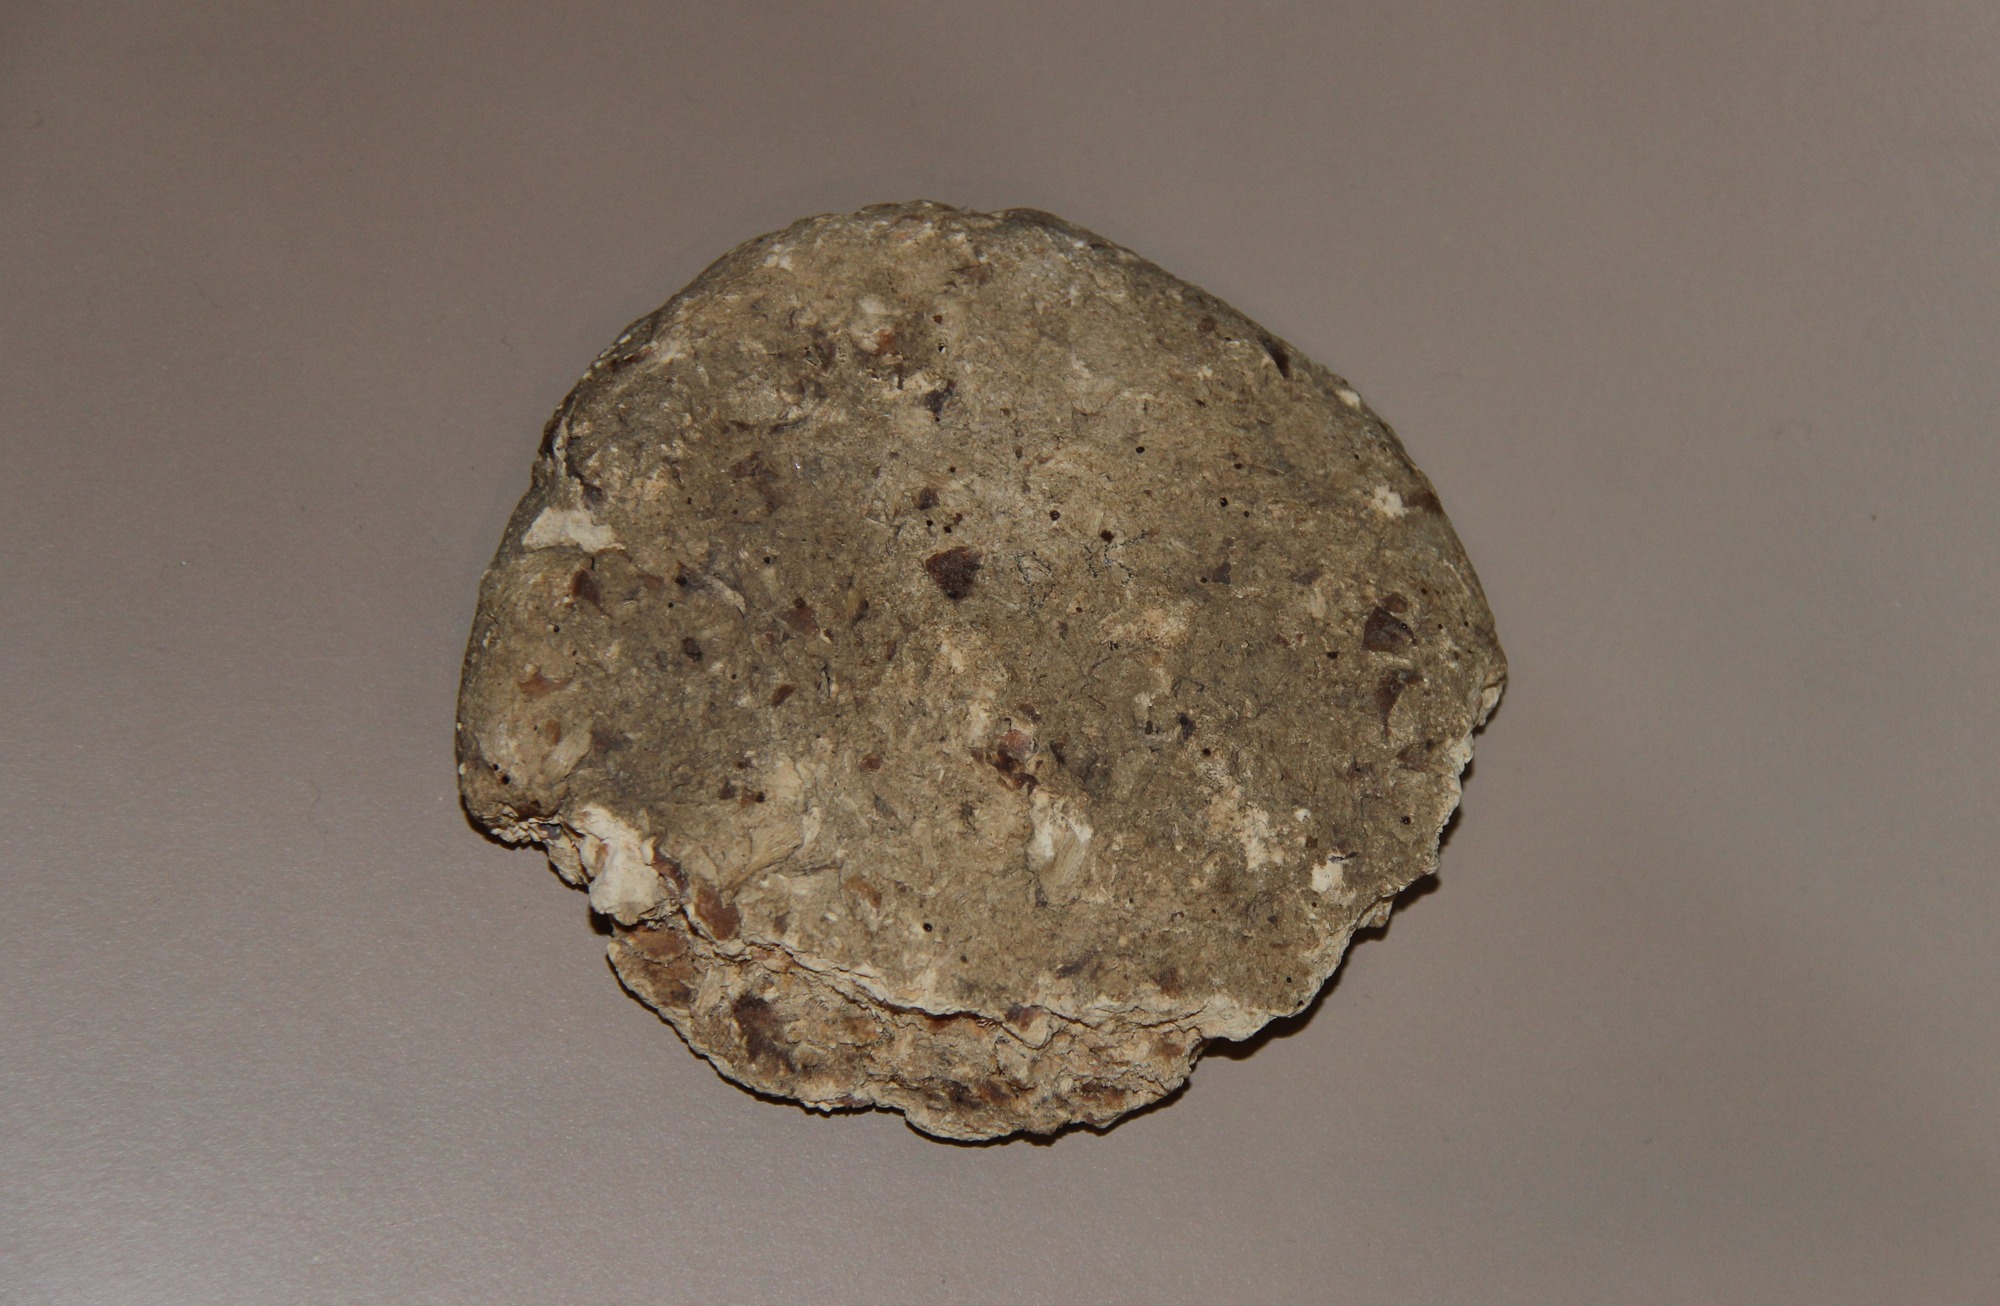 A round, flattened cake speckled with shades of brown